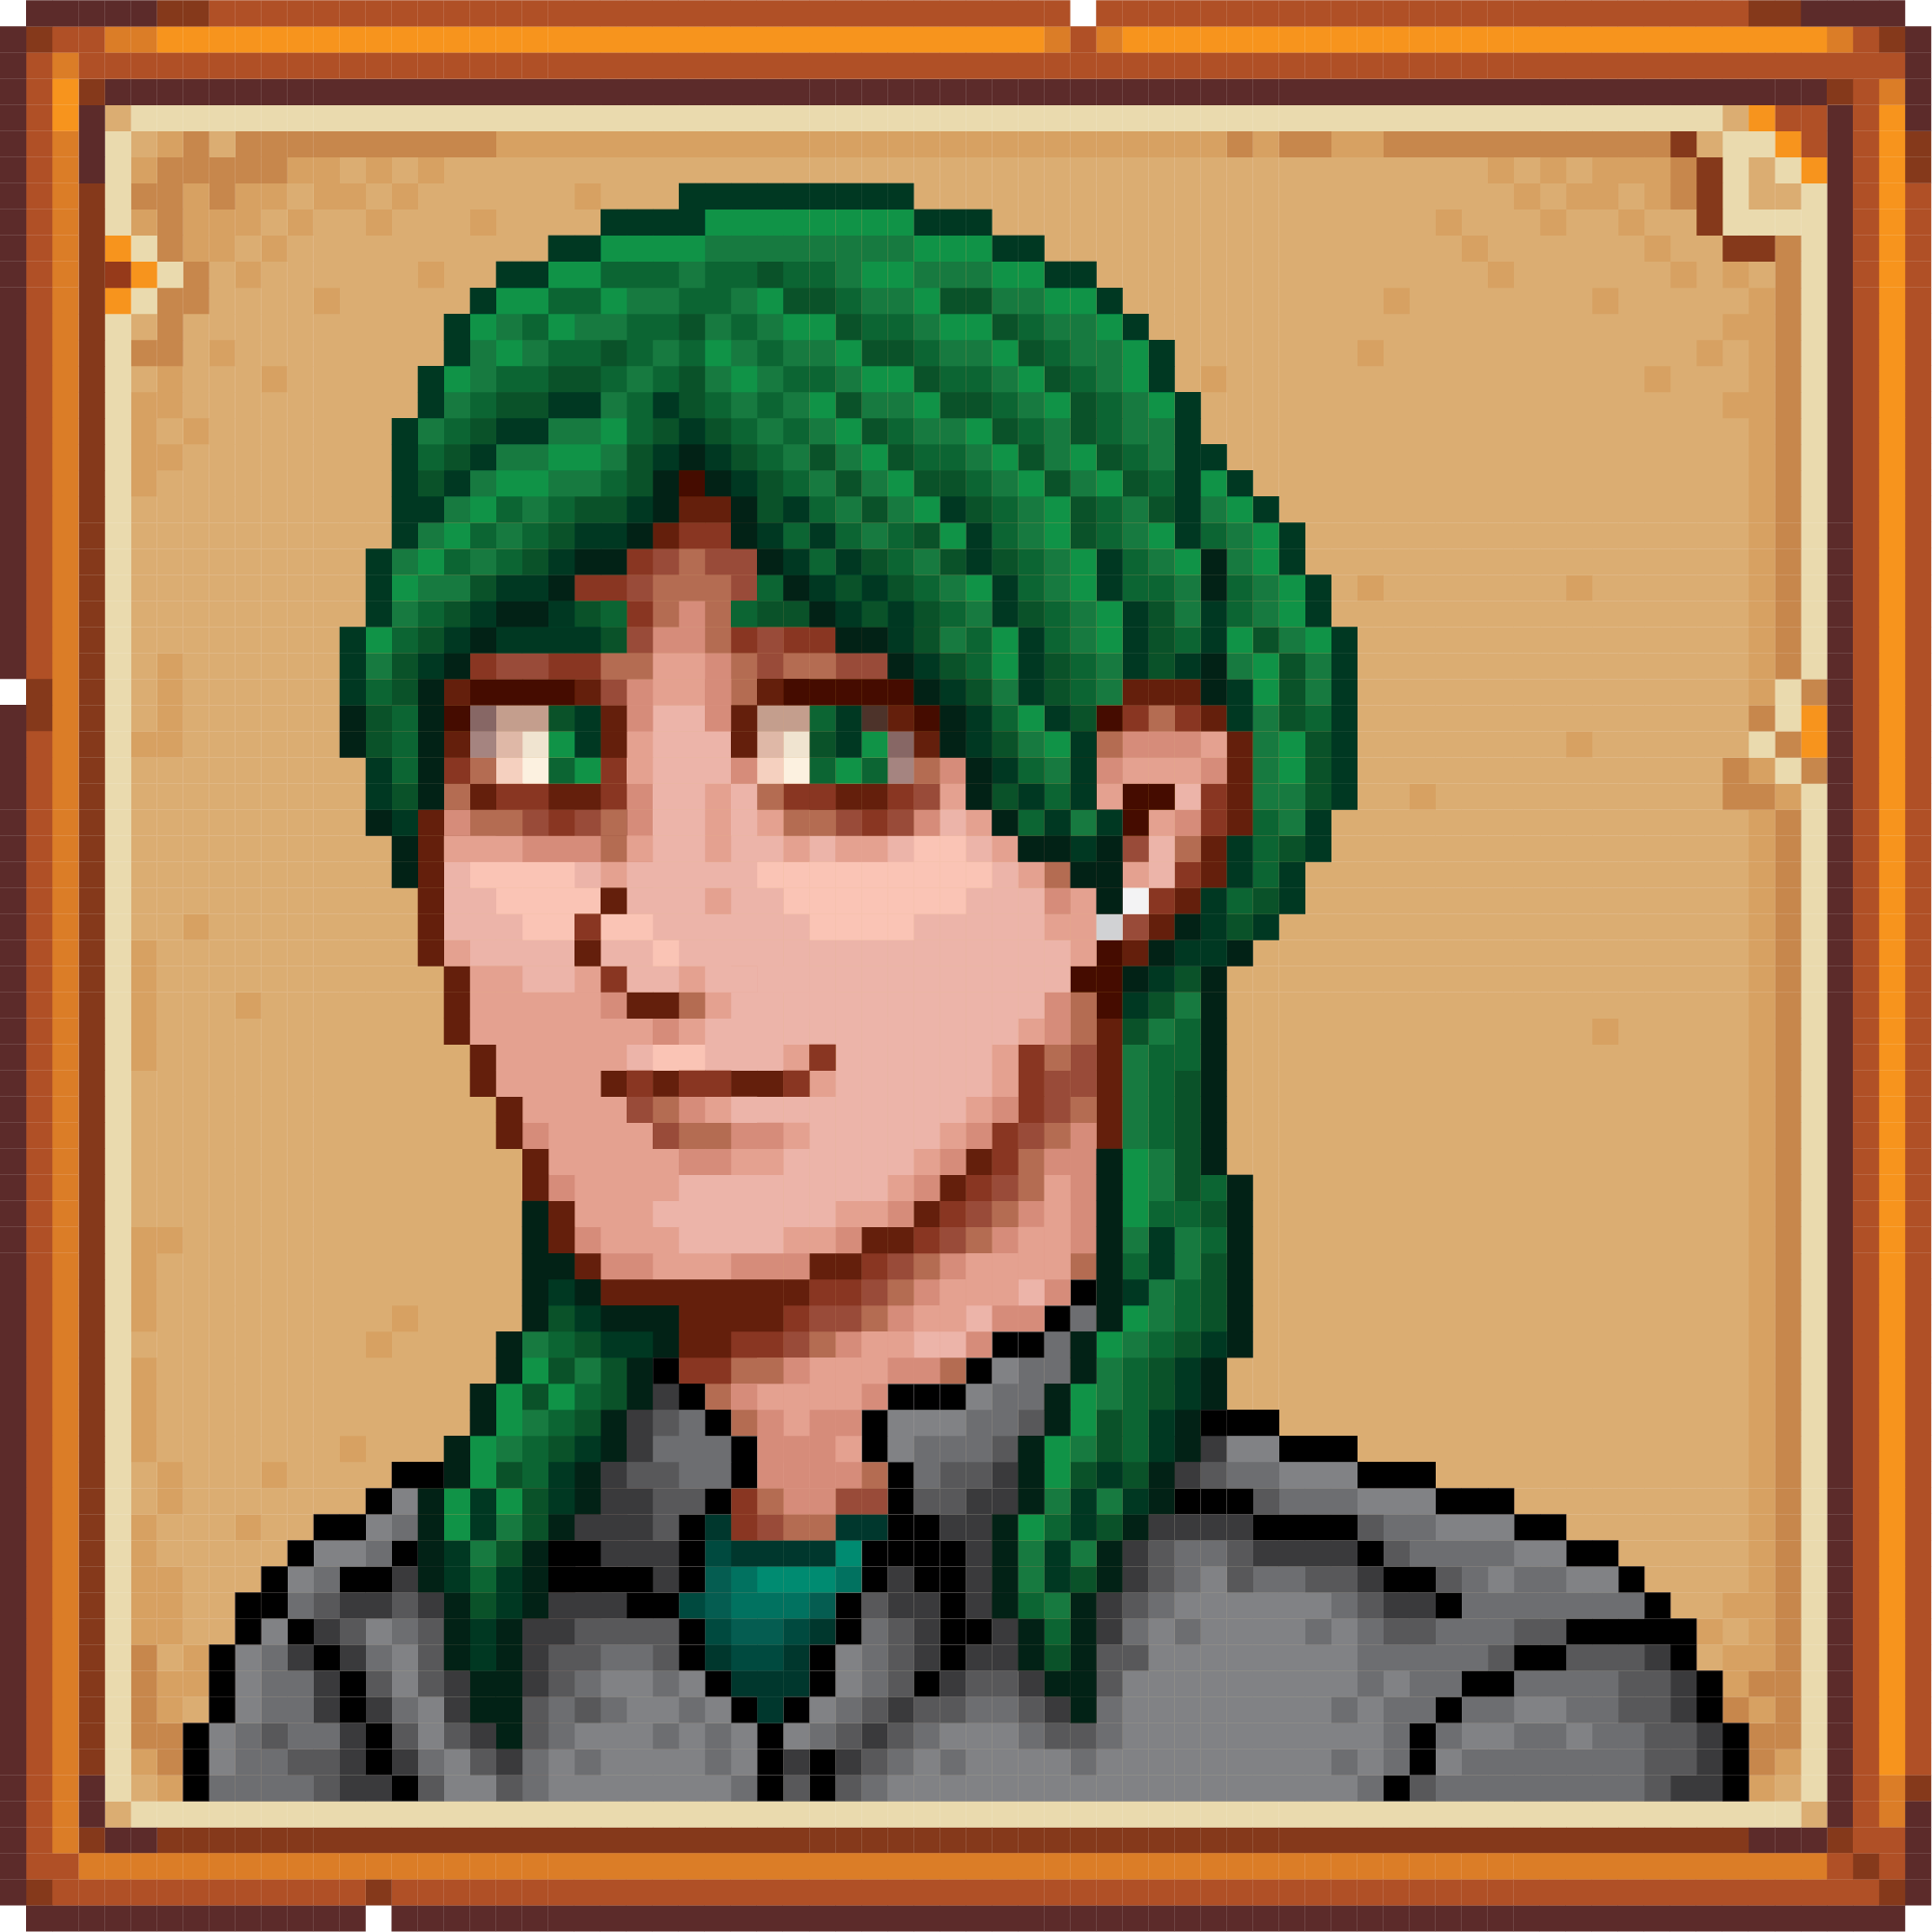 Custom portrait of my Stardew Valley character! Style follows that of Concerned Ape who created the game. Style is pixelized, he has green hair, green eyes, and a gray shirt.